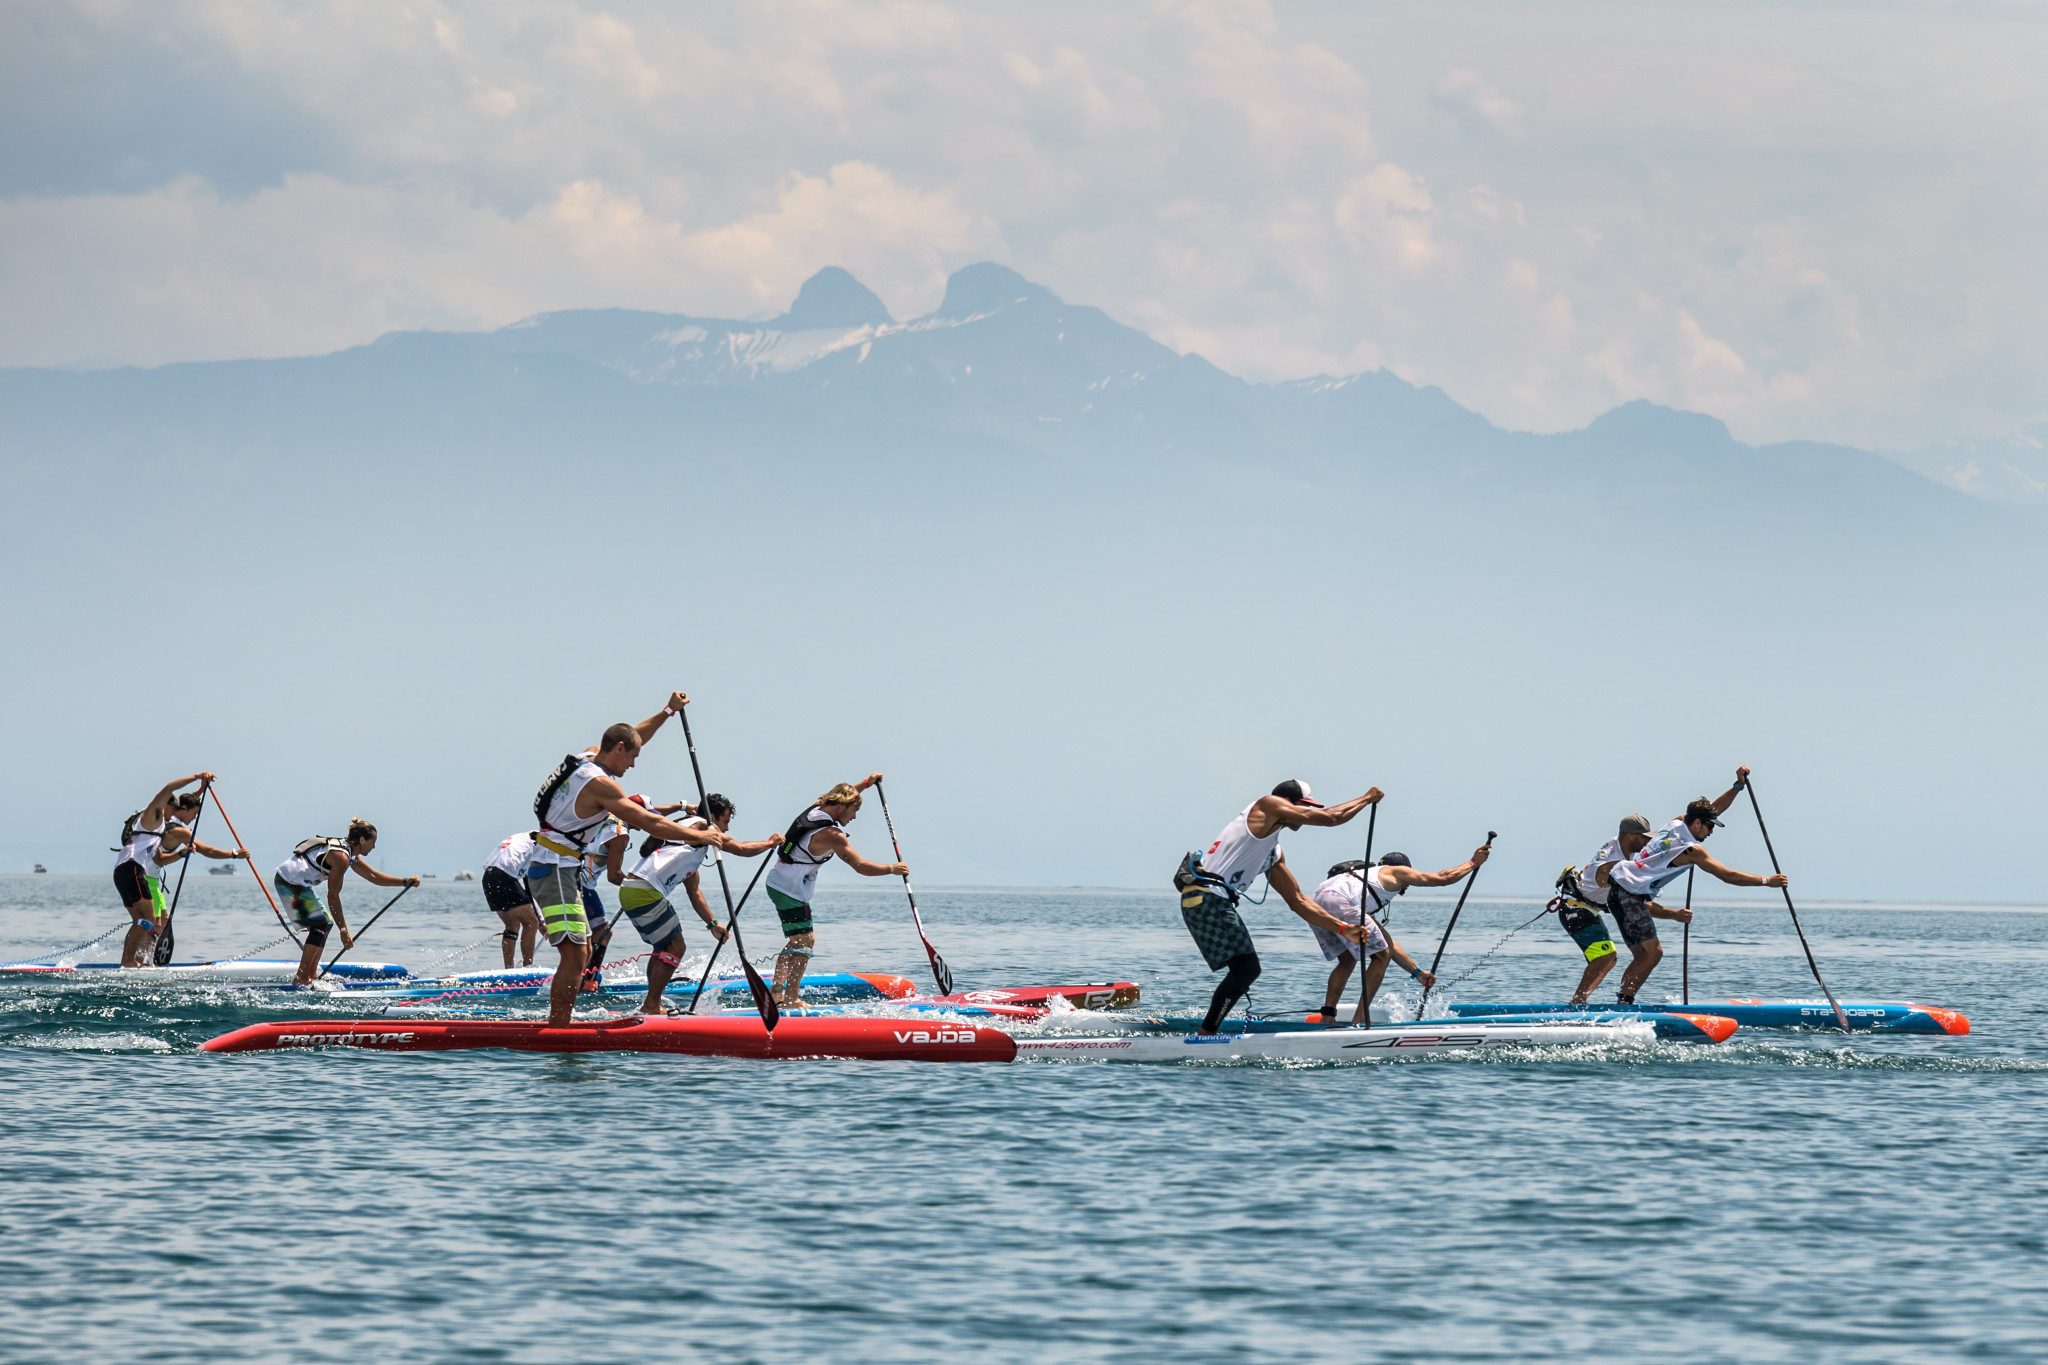 ISA re-affirms commitment to resolving stand-up paddle governance dispute through CAS